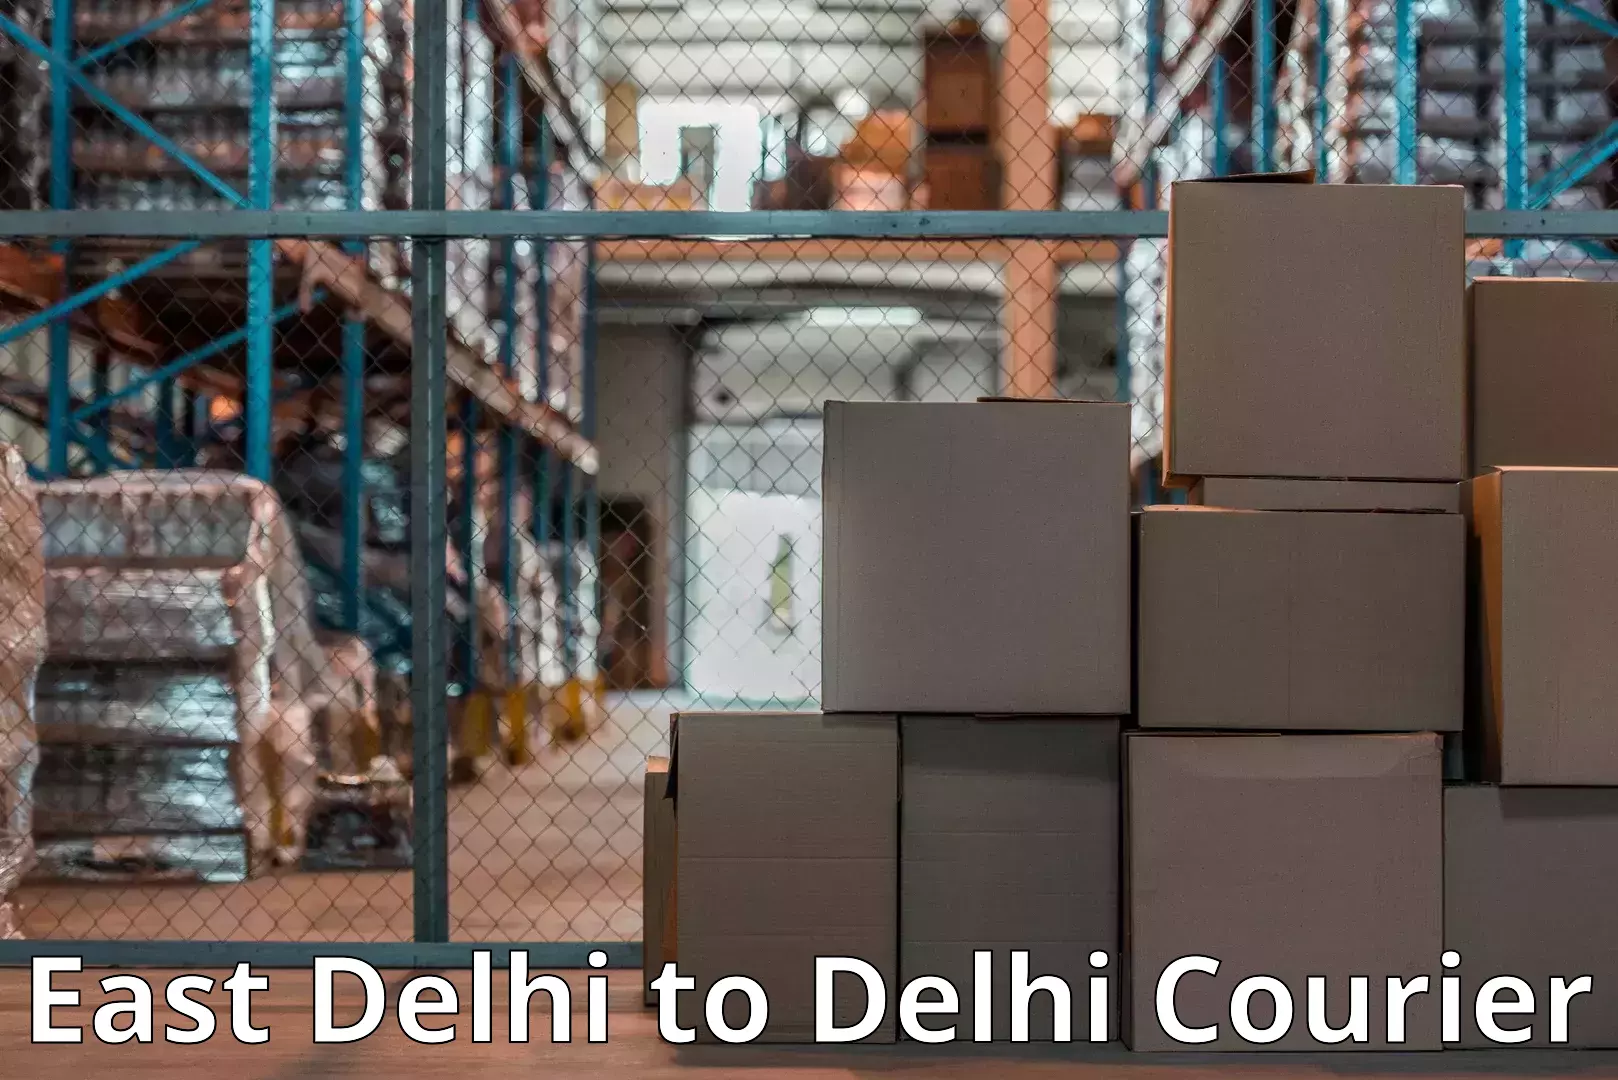 Furniture delivery service East Delhi to NCR